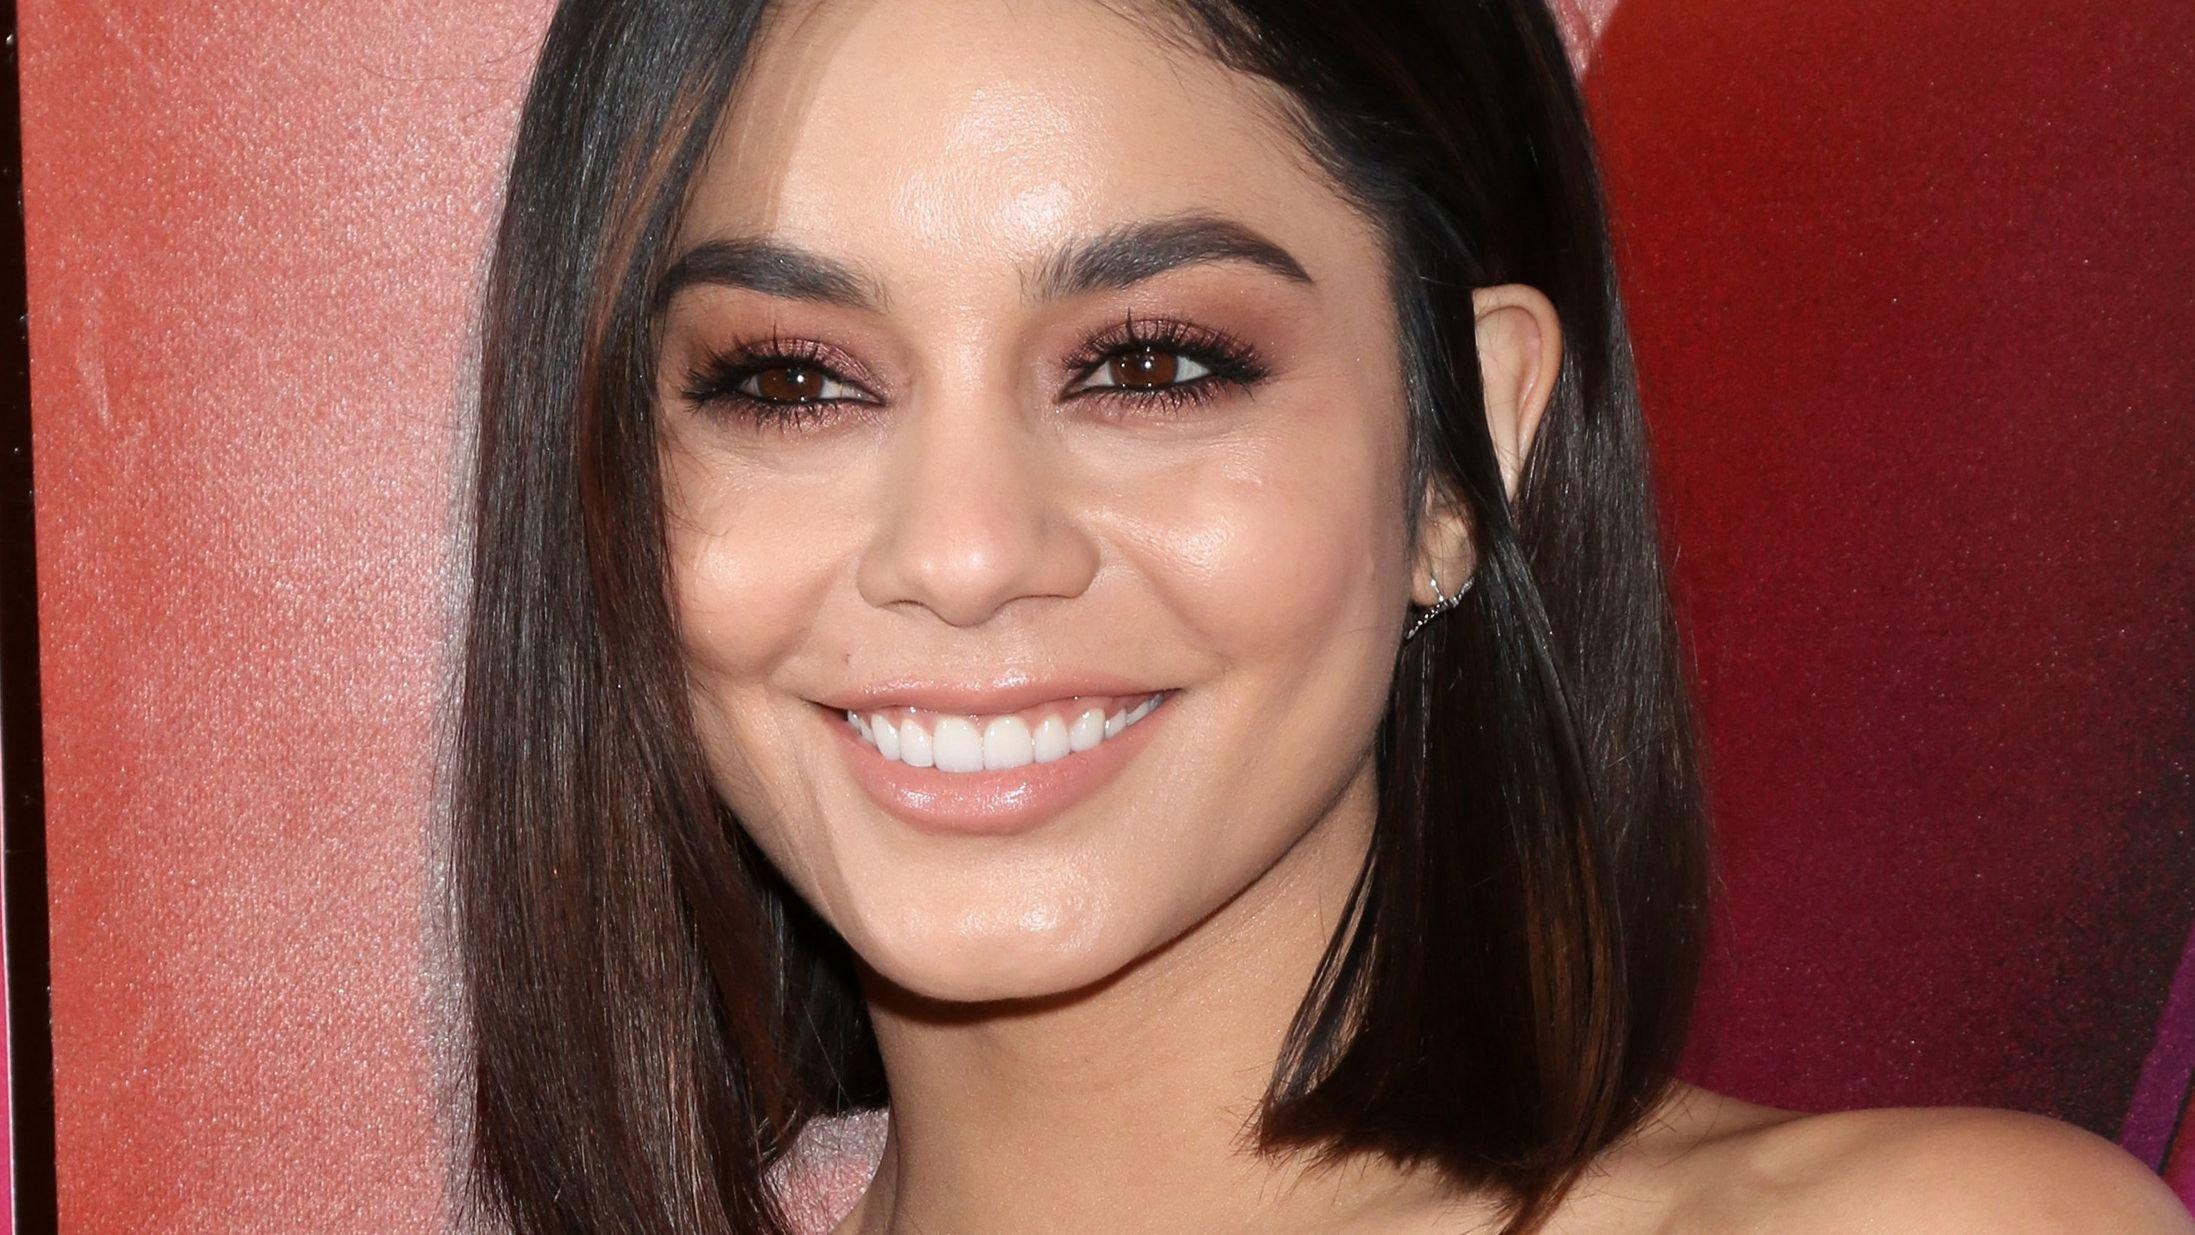 Vanessa Hudgens with short hair smiling for a photograph.